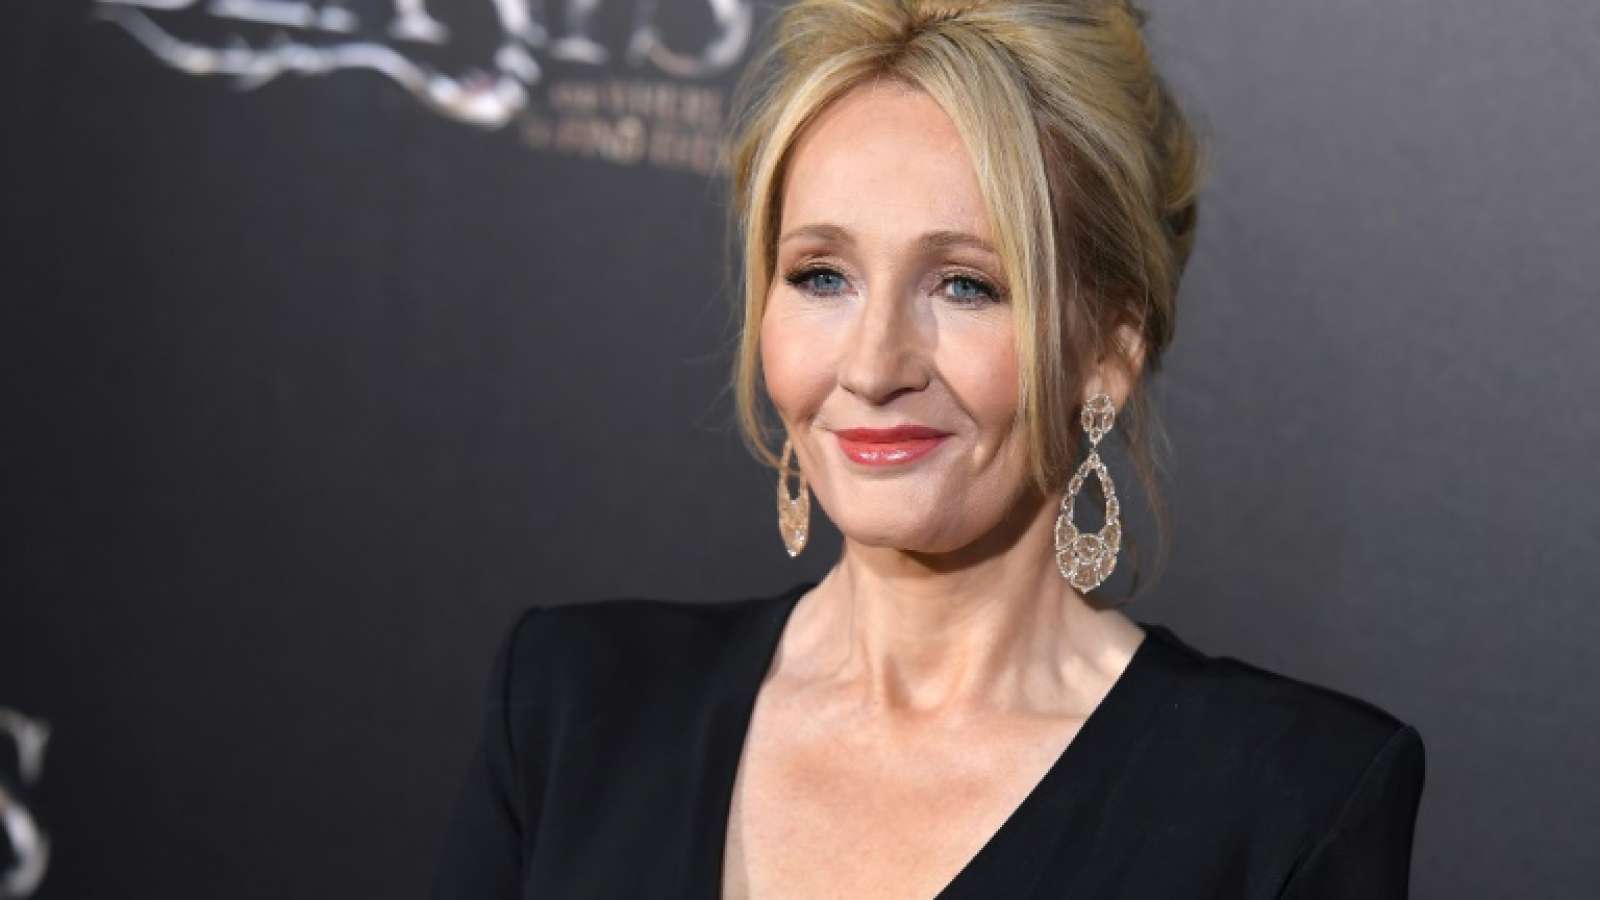 J.K. Rowling: Rowling sorry after accusing Trump of ignoring